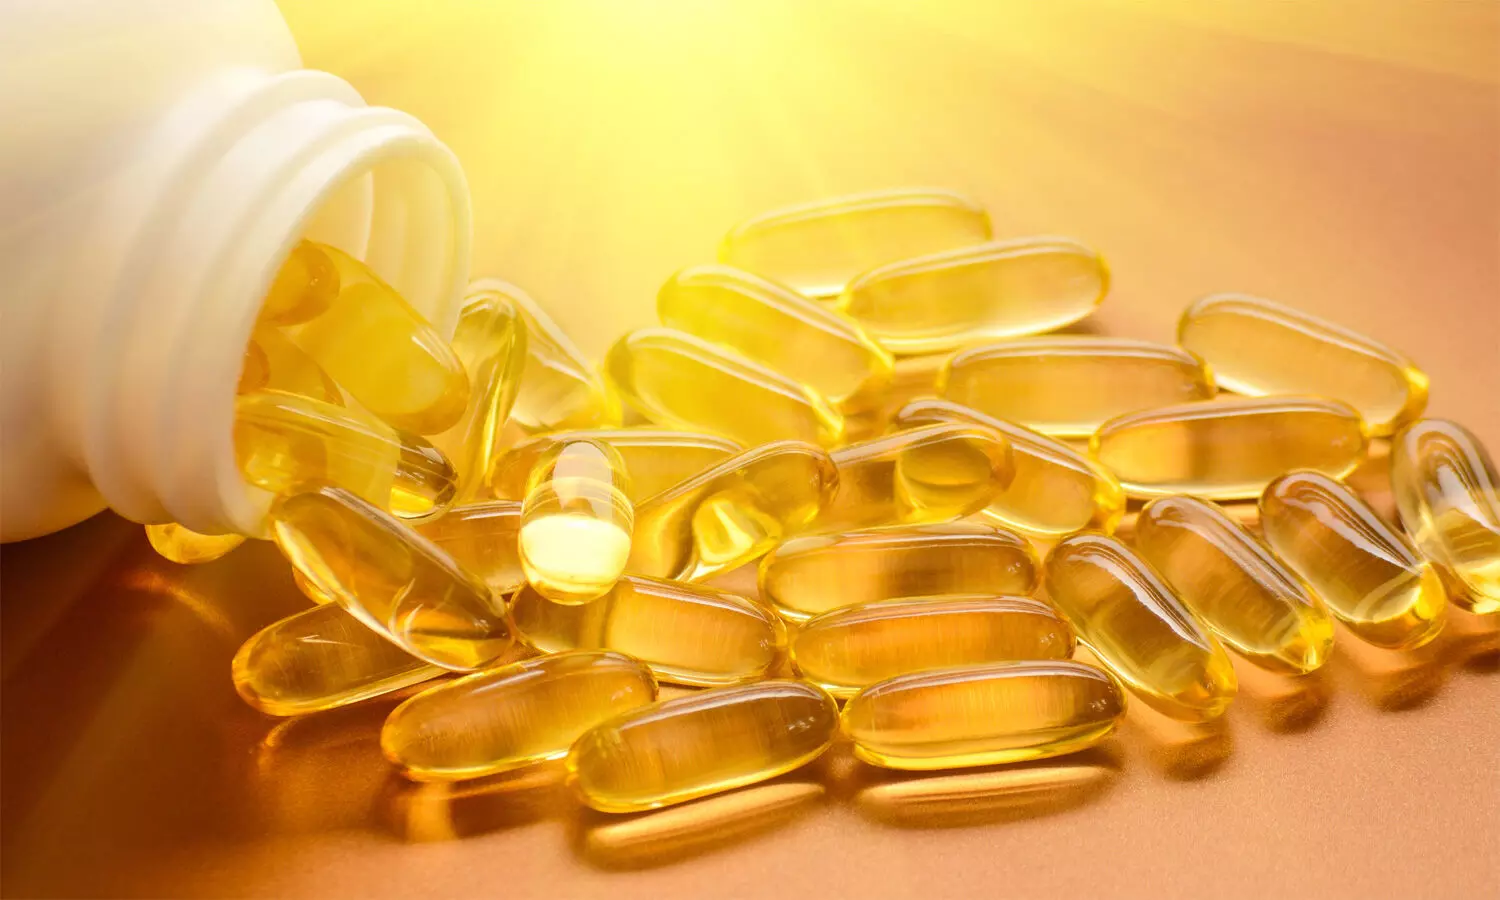 No benefit of High dose Vitamin D  in Covid 19, BMJ  study refutes earlier claims